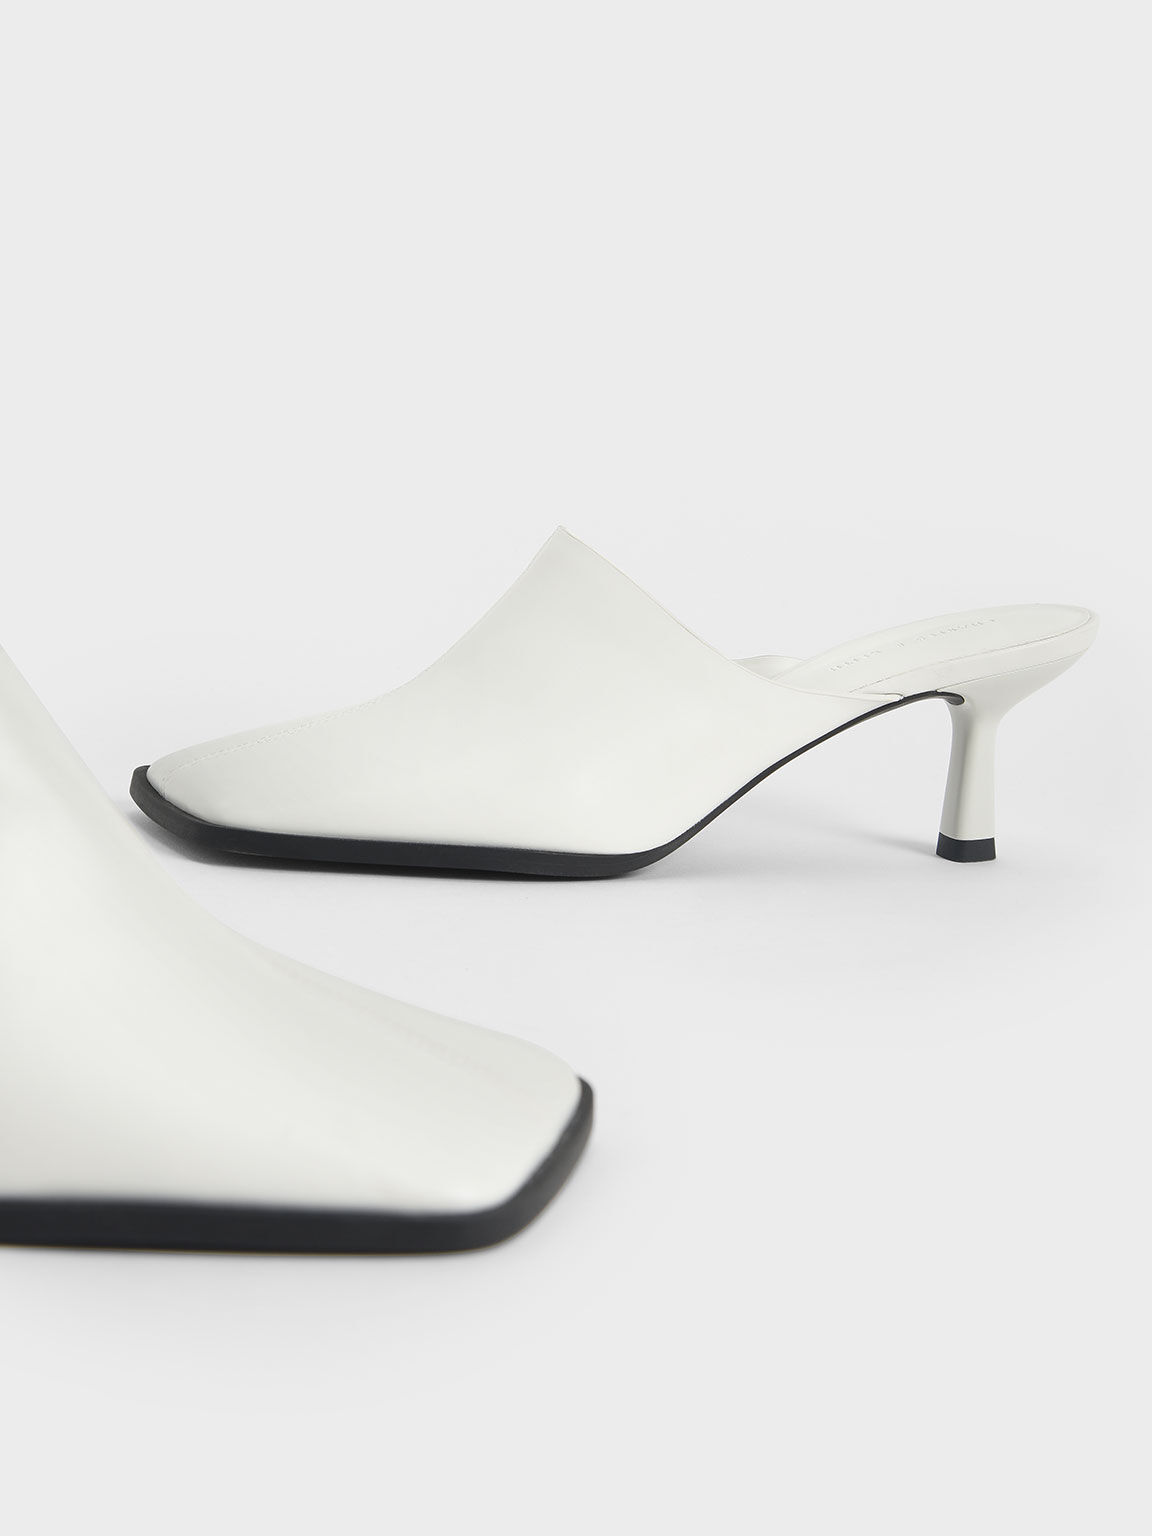 Covered Mules, White, hi-res